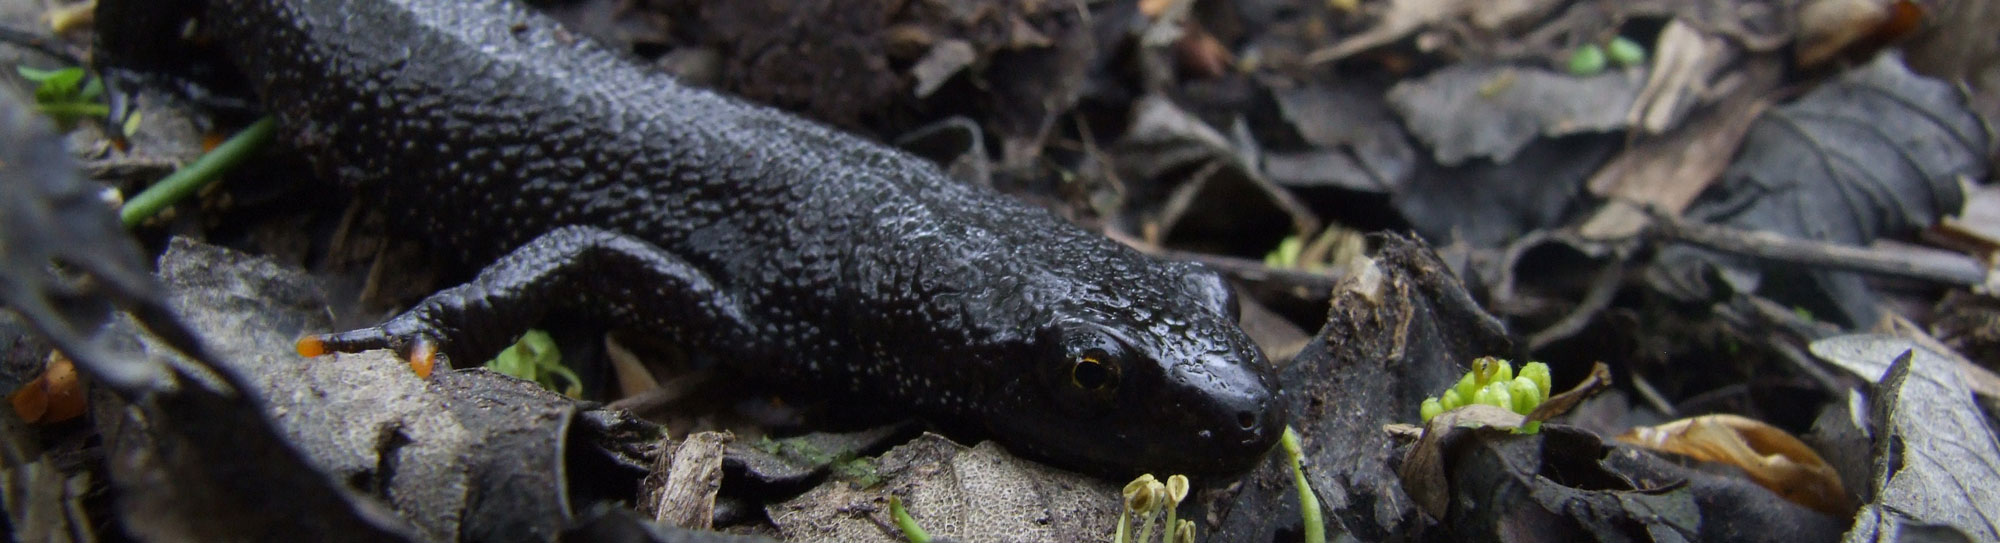 female-great-crested-newt